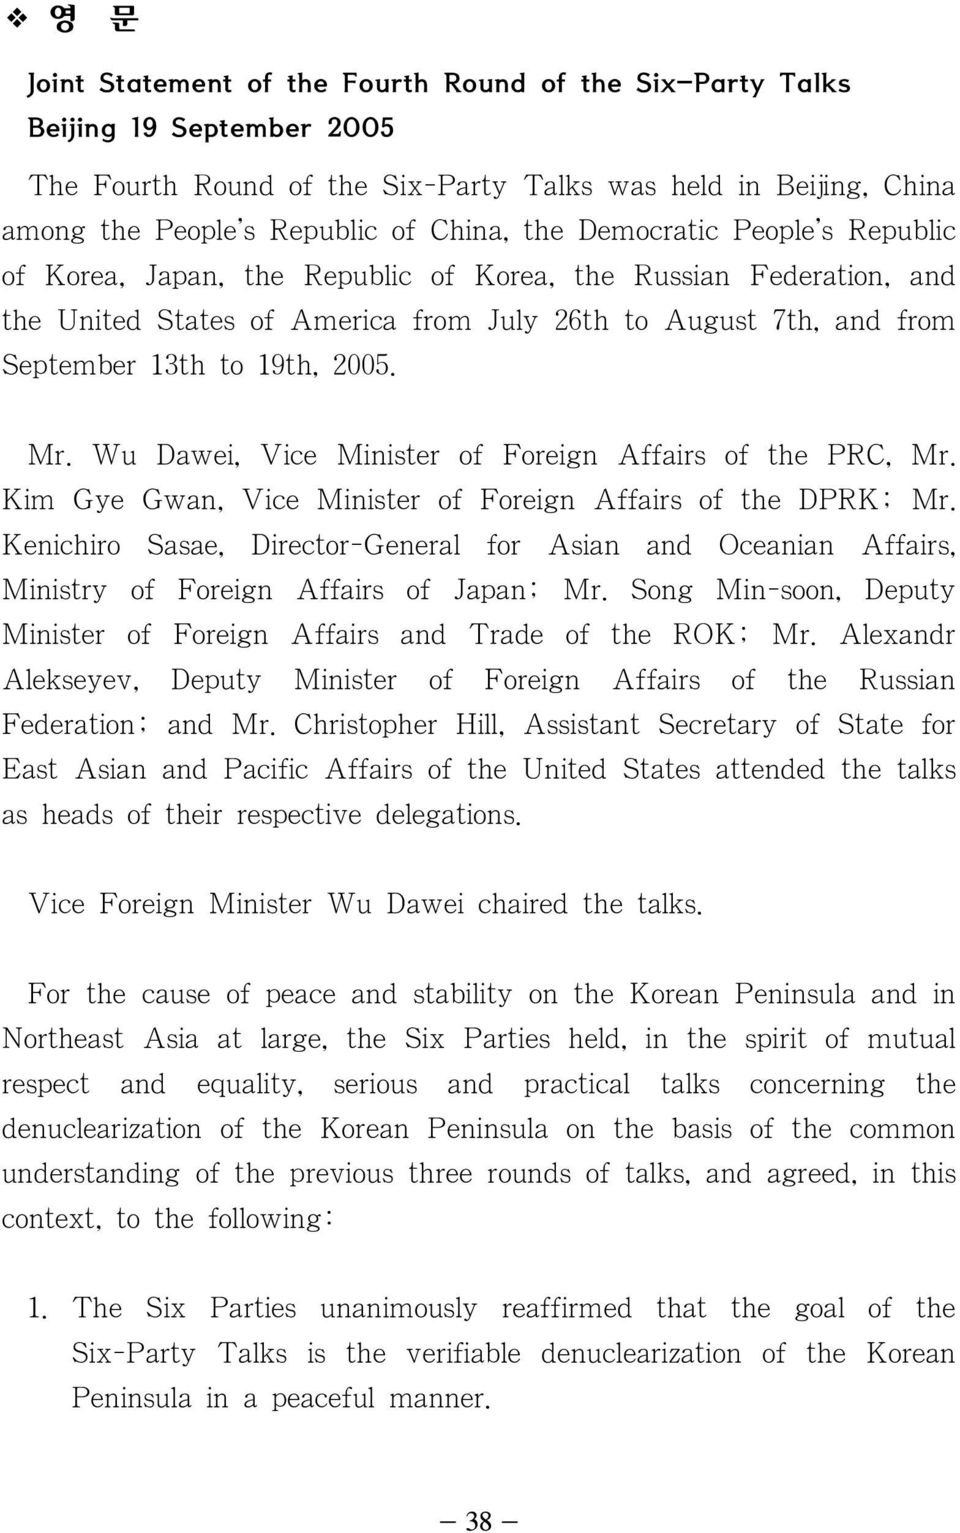 Wu Dawei, Vice Minister of Foreign Affairs of the PRC, Mr. Kim Gye Gwan, Vice Minister of Foreign Affairs of the DPRK; Mr.